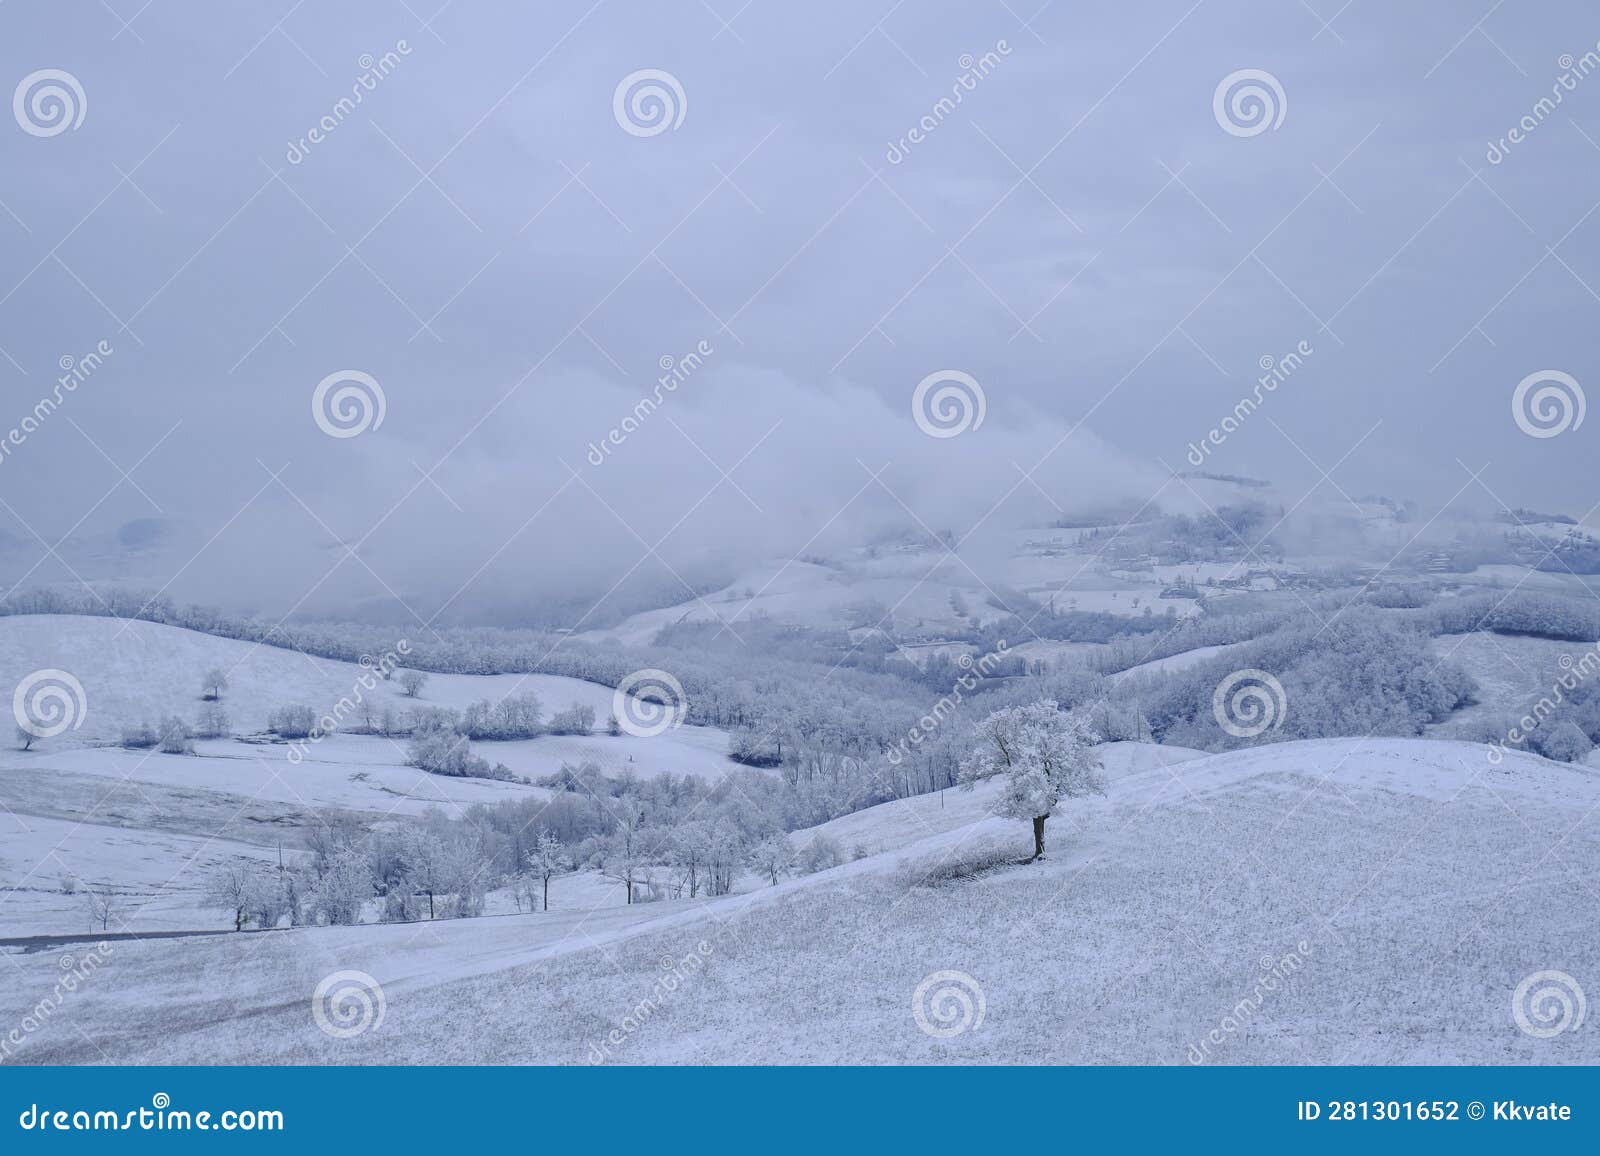 blizzard in the mountains. snowy hills, mountains, nature, horizon. natural background. appennino tosco-emiliano